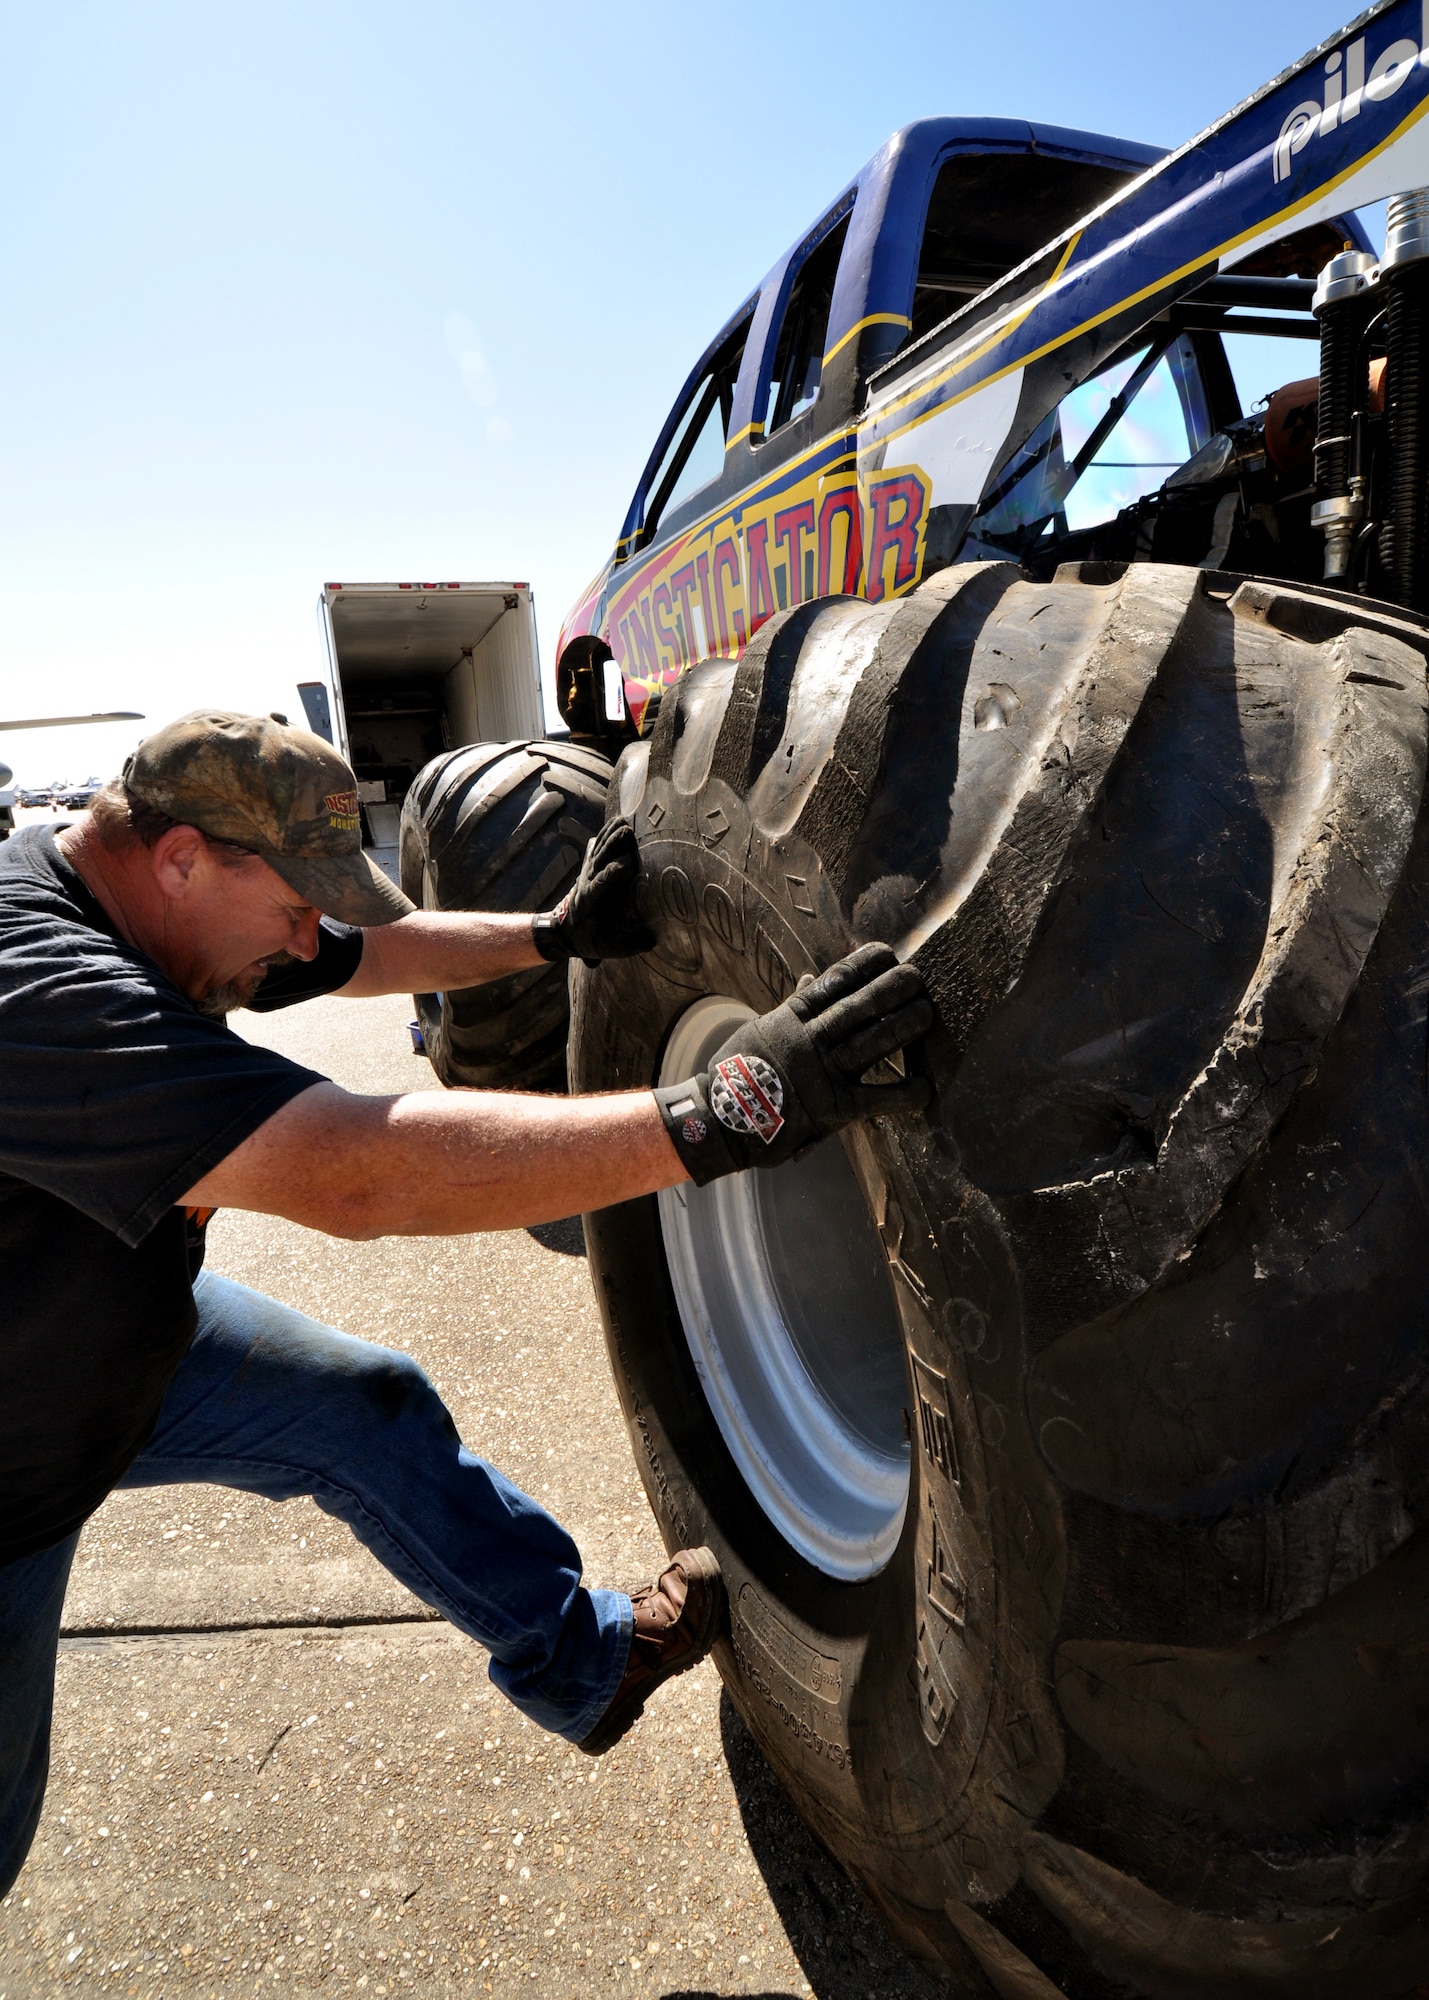 Lionel Easler kicks the "monster" tires into place on his truck "The Instigator," April 9 in preparation for the weekend airshow at Eglin Air Force Base, Fla.  The truck was on display with the Air Force Reserve recruiting booth.  Mr. Easler has been driving monster trucks for five years and competes in about 35 truck shows a year.  This was the first airshow however for the Florida native.  (U.S. Air Force photo/Tech. Sgt. Samuel King Jr.)